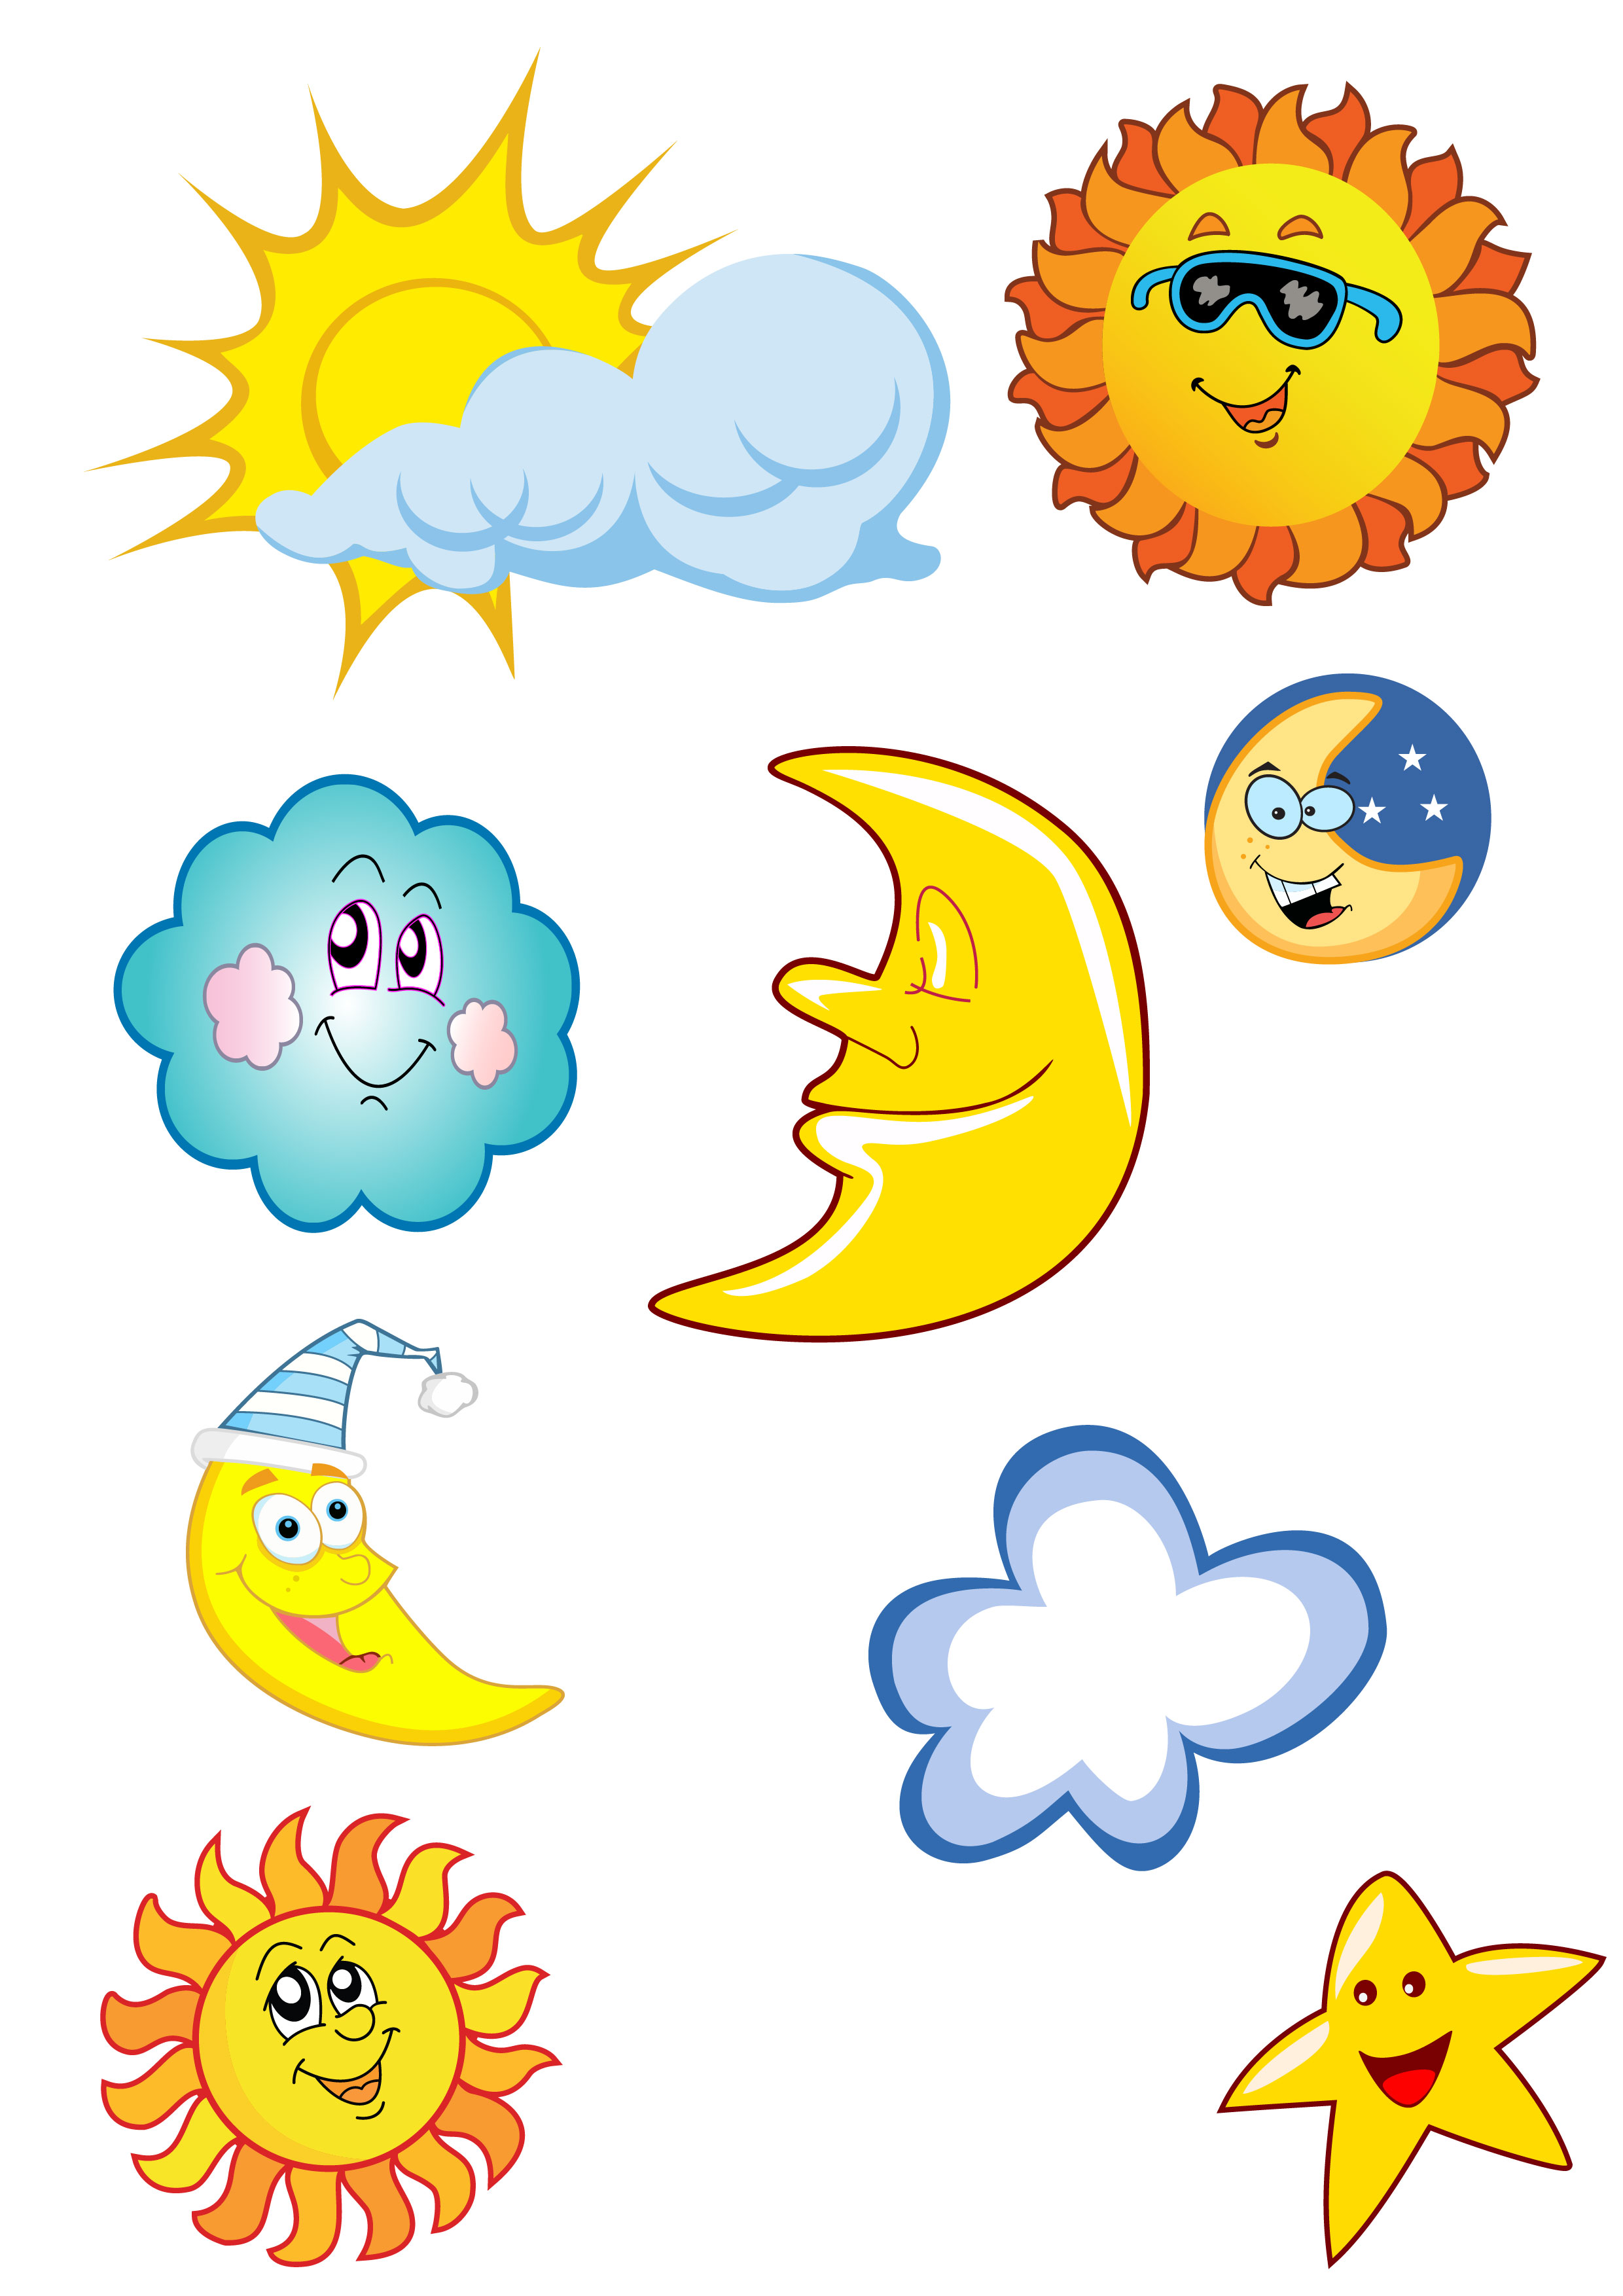 And Clouds Clip Art Sun With Sunglasses Illustration Smiling Cloud And